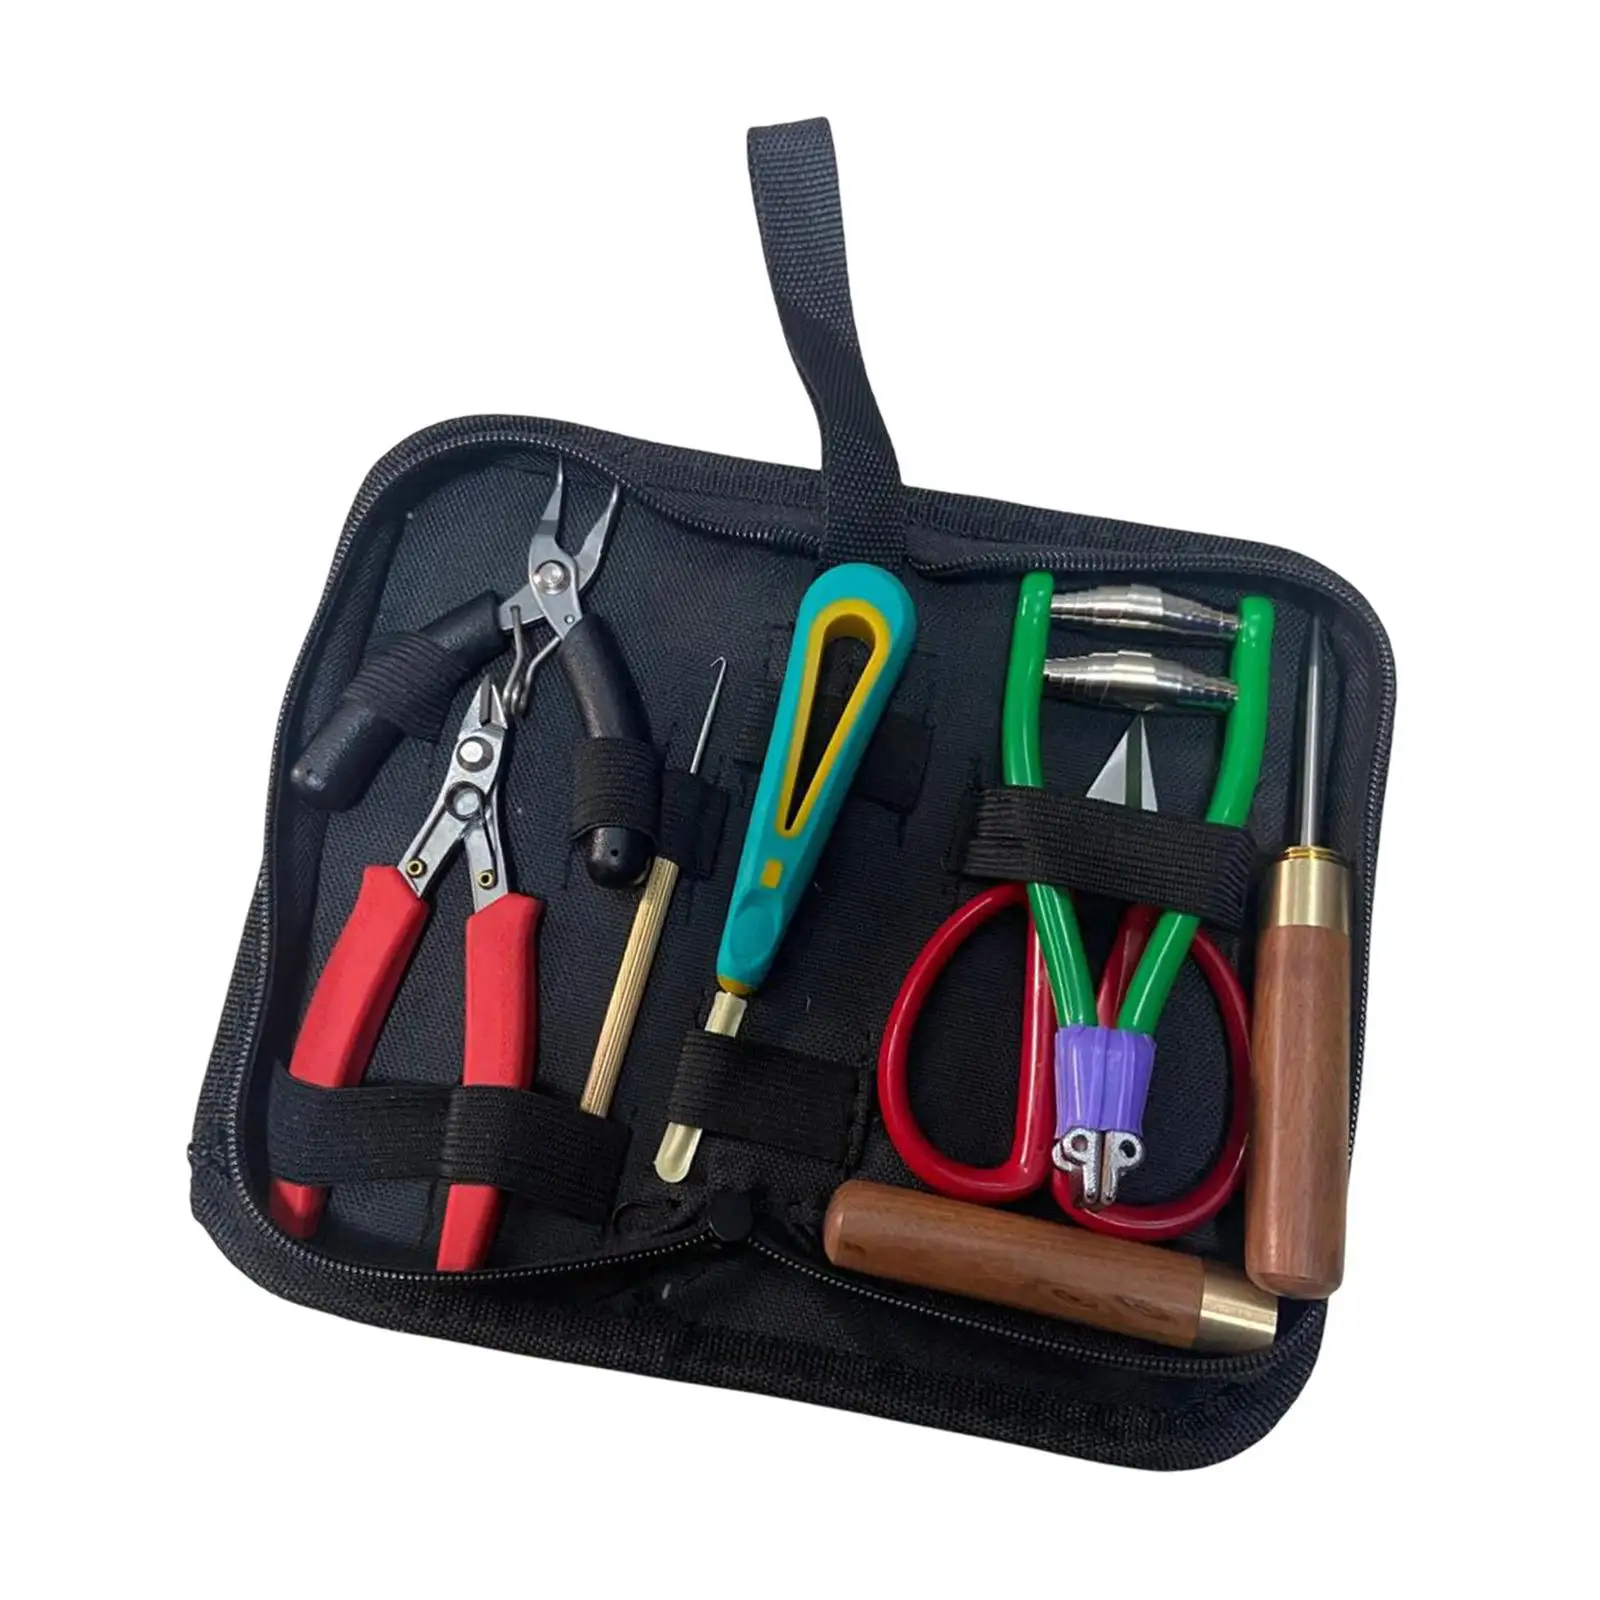 Handheld Starting Stringing Clamp Tool Kit for Outdoor Sports